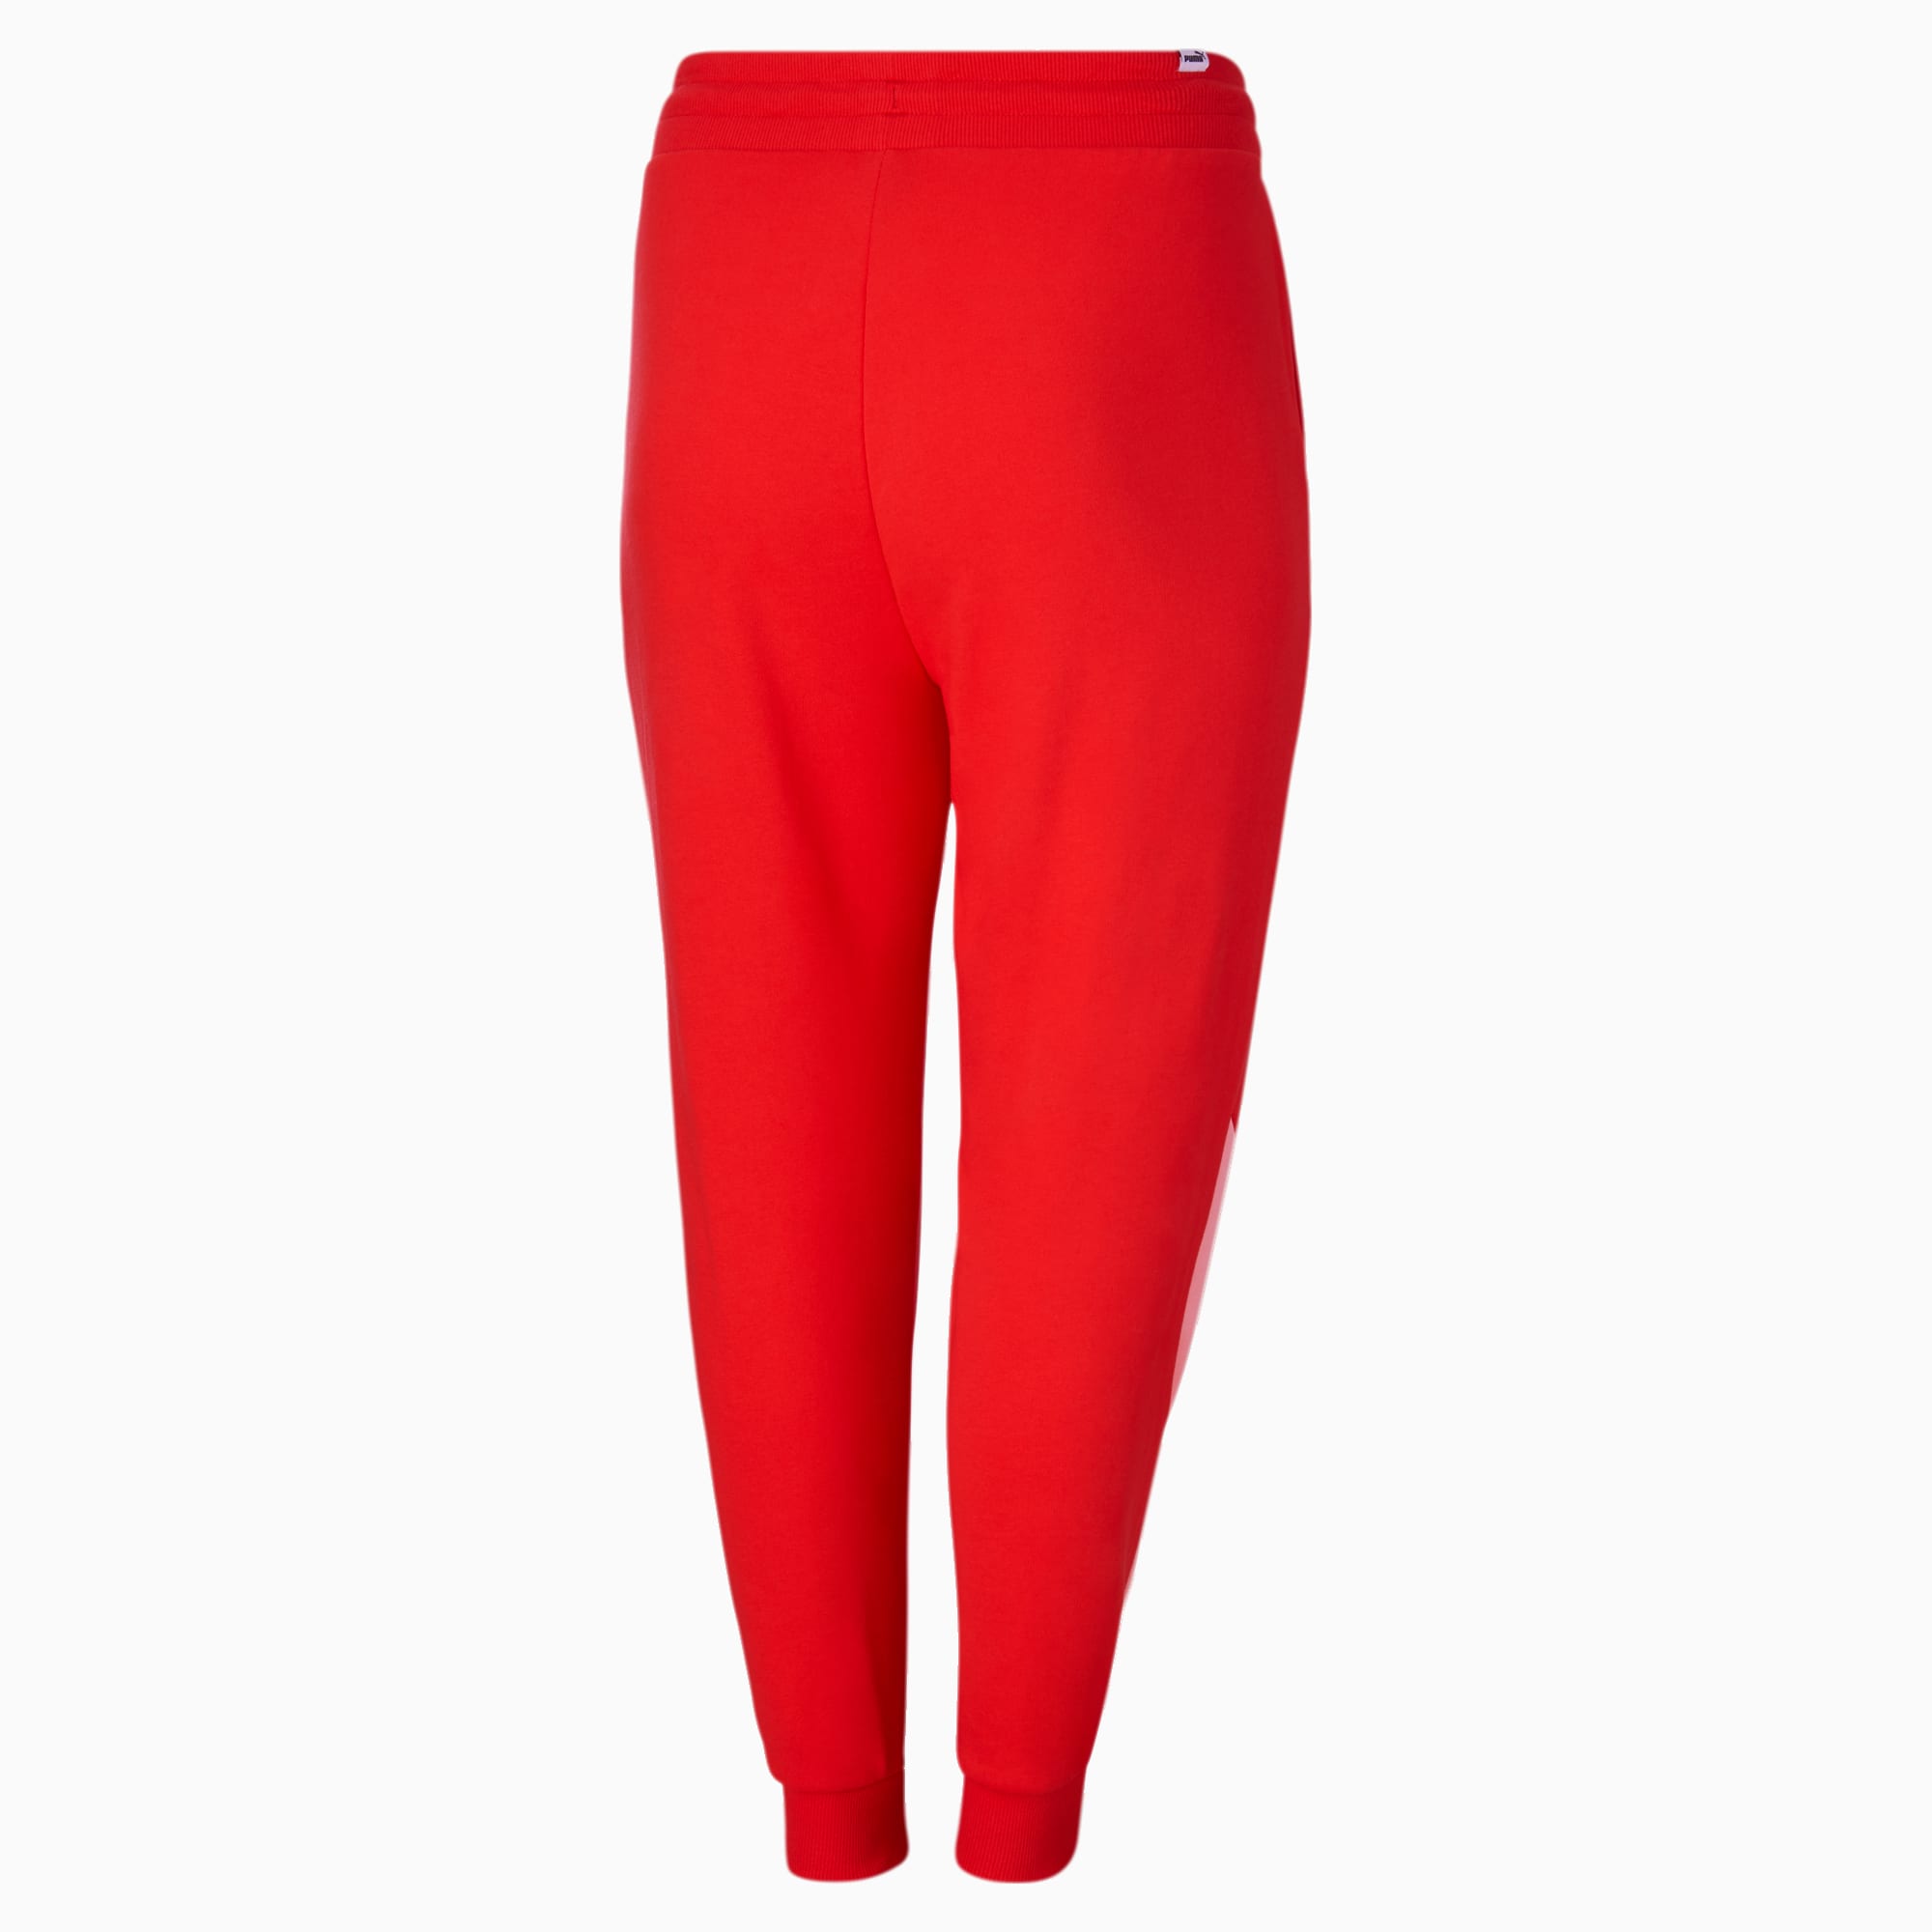 Puma Ladies jogger tights in Zinfandel red size XL NWT - $26 New